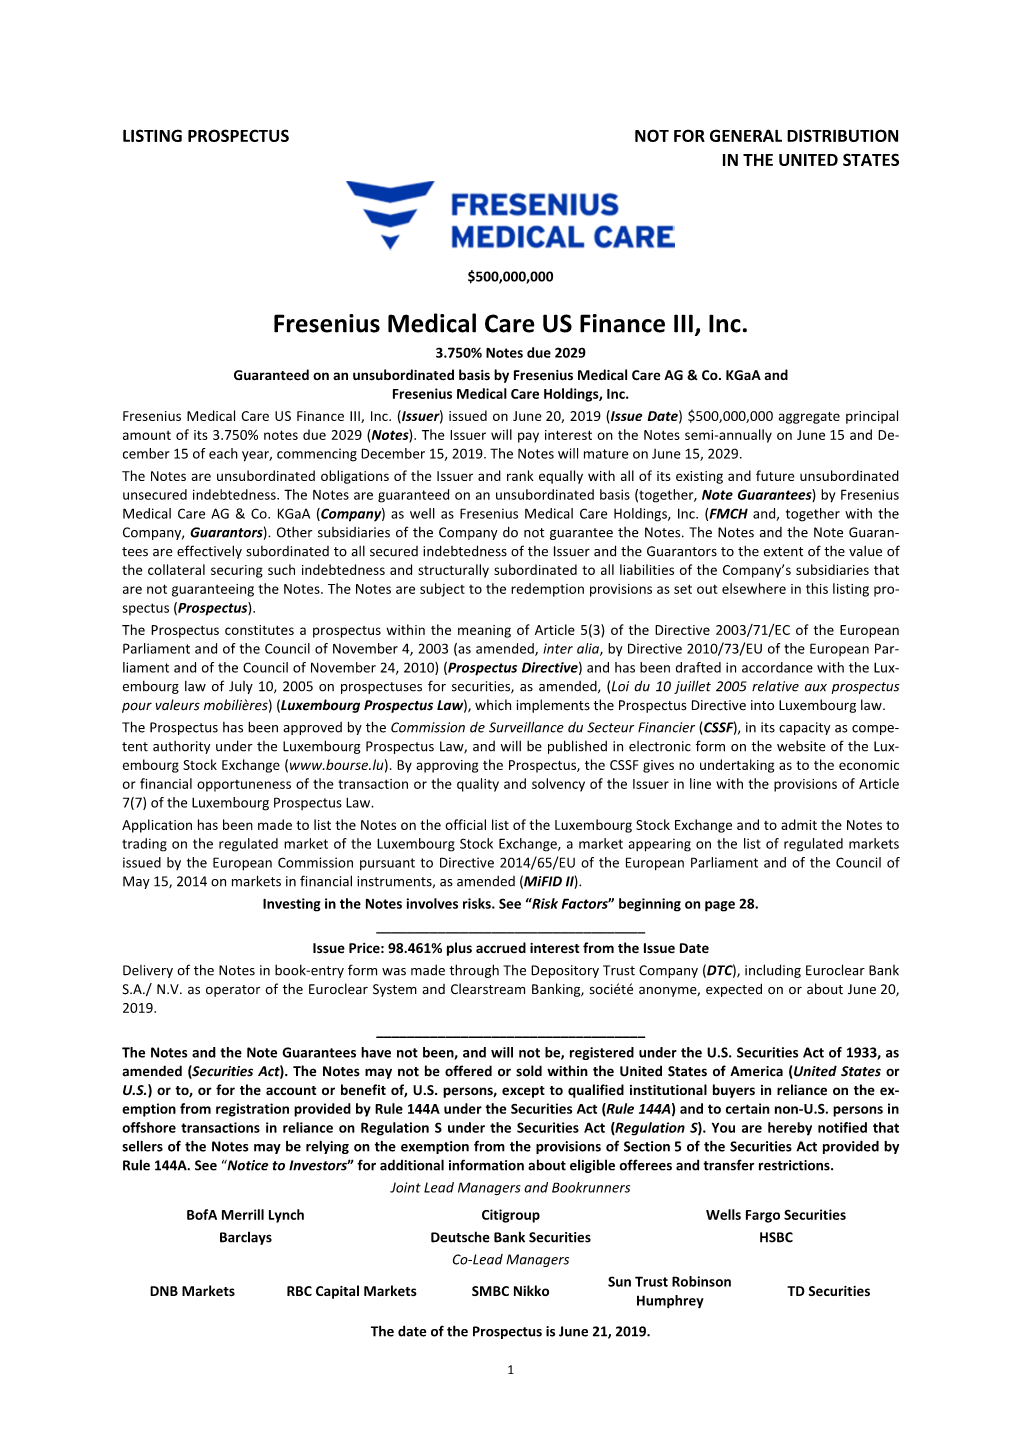 Fresenius Medical Care US Finance III, Inc. 3.750% Notes Due 2029 Guaranteed on an Unsubordinated Basis by Fresenius Medical Care AG & Co